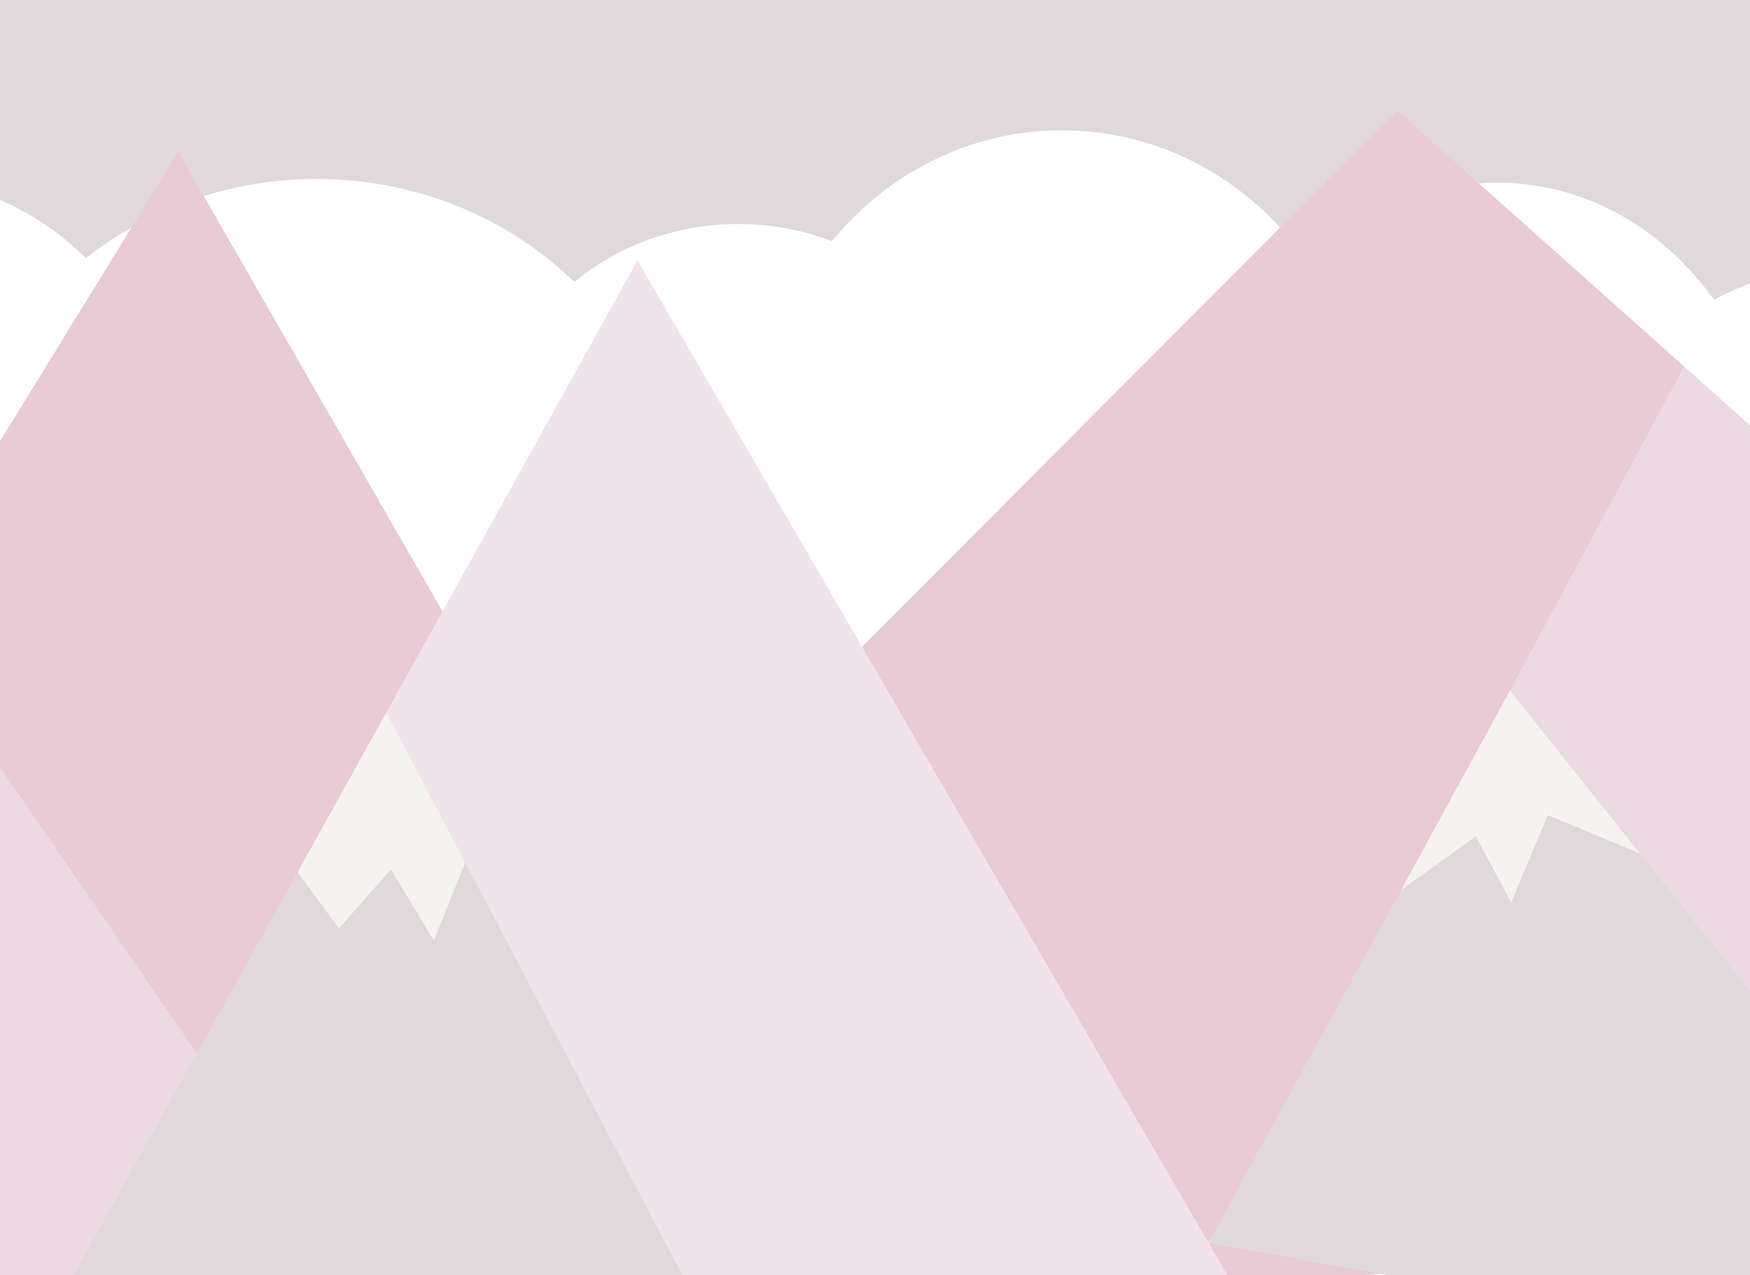             Nursery Mountains with Clouds Wallpaper - Pink, White, Grey
        